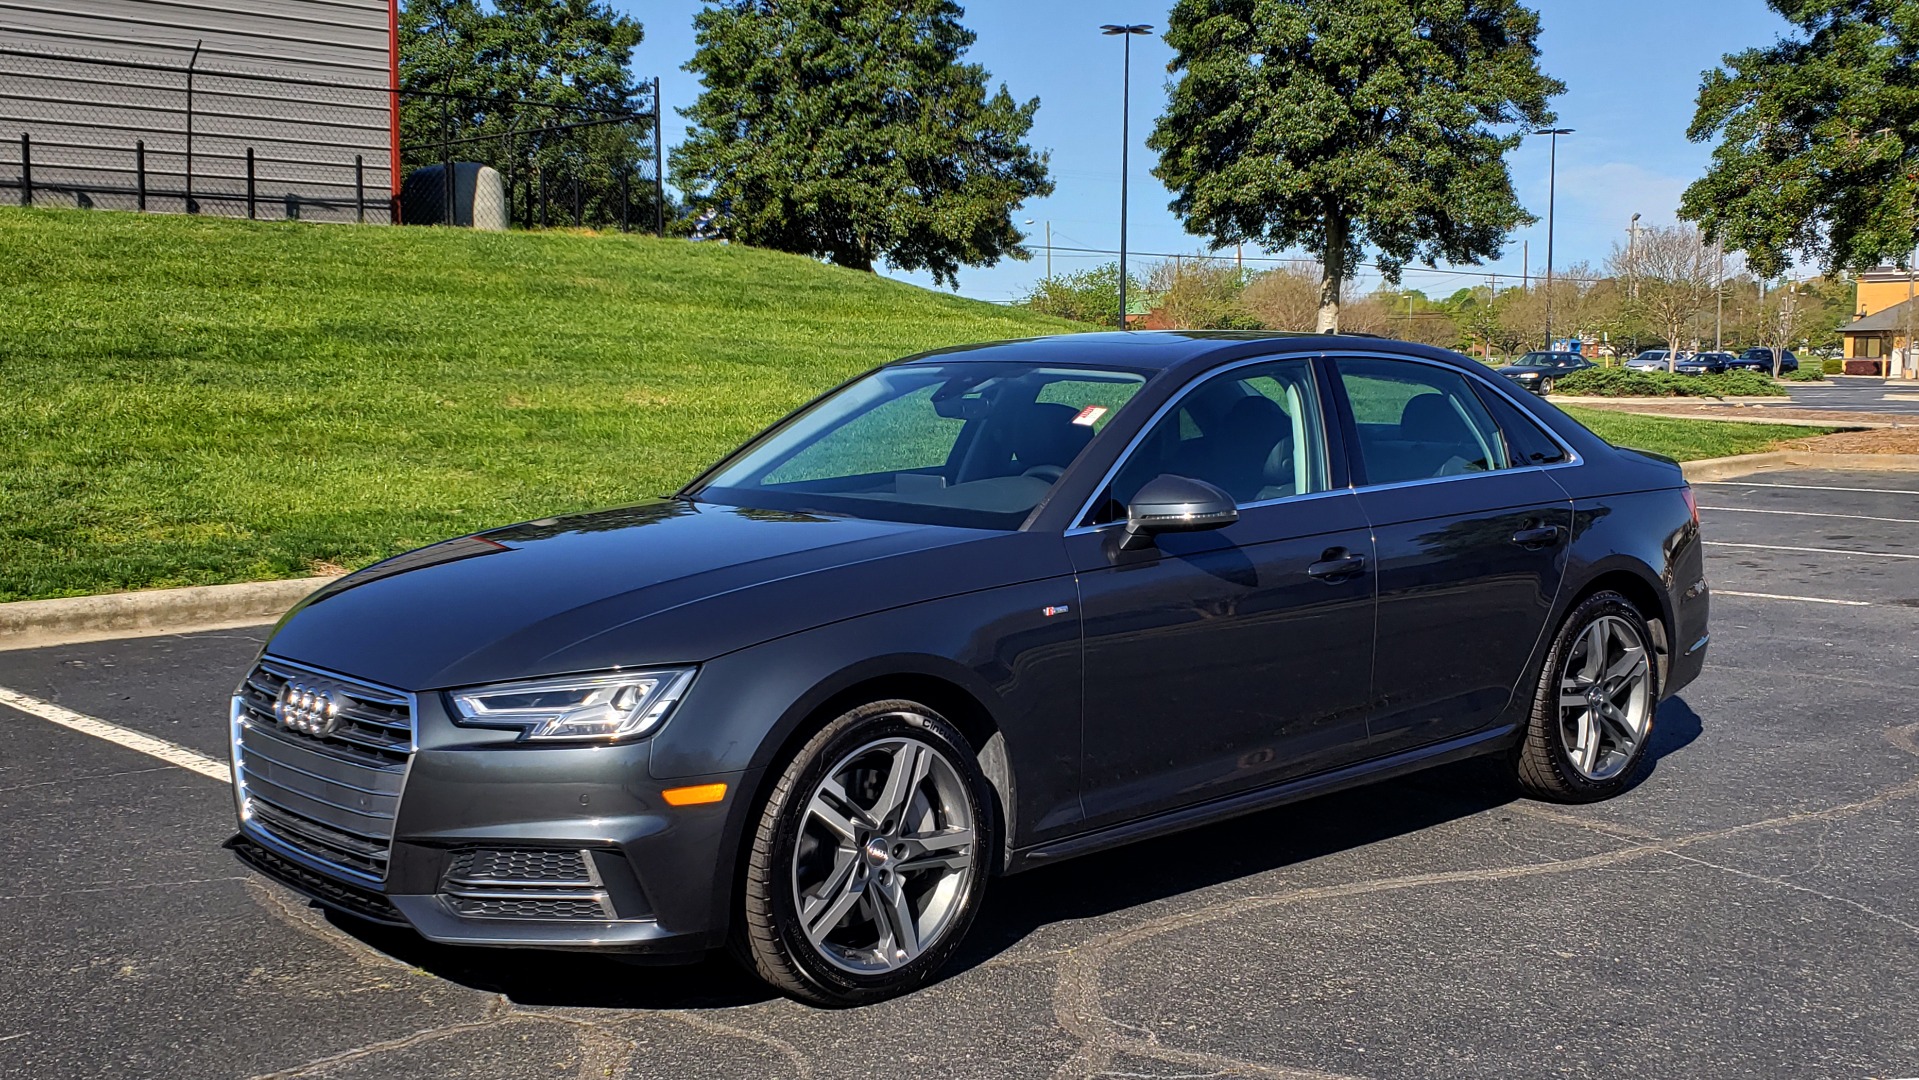 Used 2017 Audi A4 PREMIUM PLUS 2.0T S-TRONIC / NAV / SUNROOF / REARVIEW for sale Sold at Formula Imports in Charlotte NC 28227 1